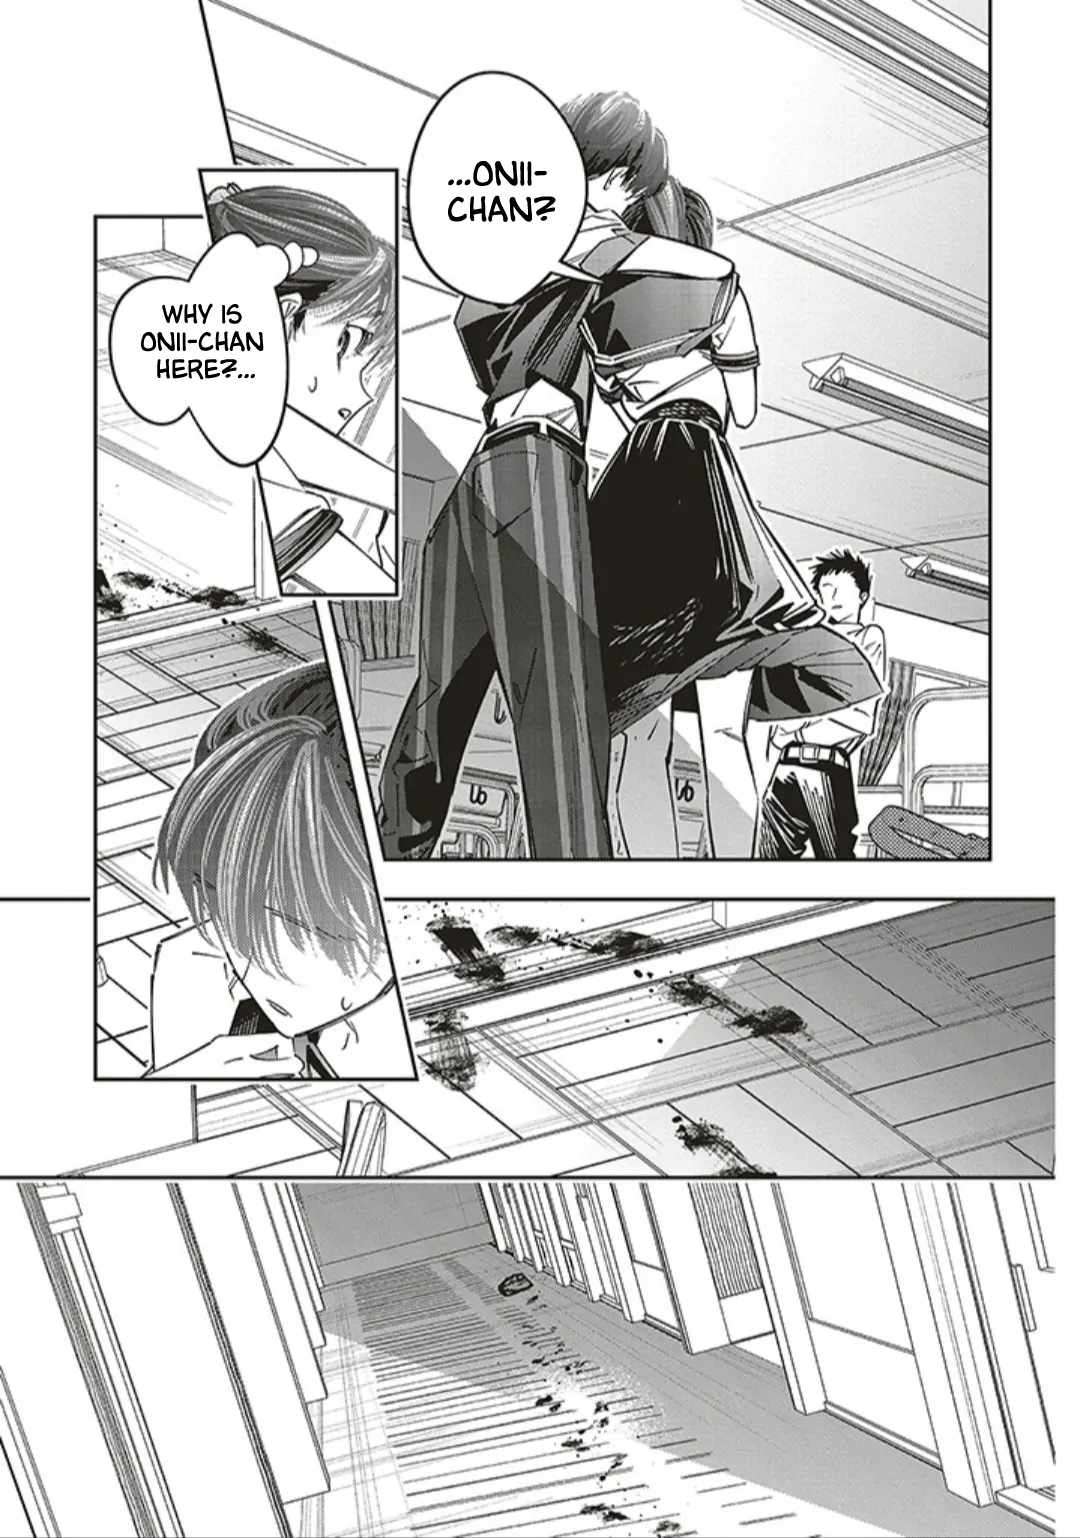 I Reincarnated As The Little Sister Of A Death Game Manga’S Murd3R Mastermind And Failed - chapter 18 - #3